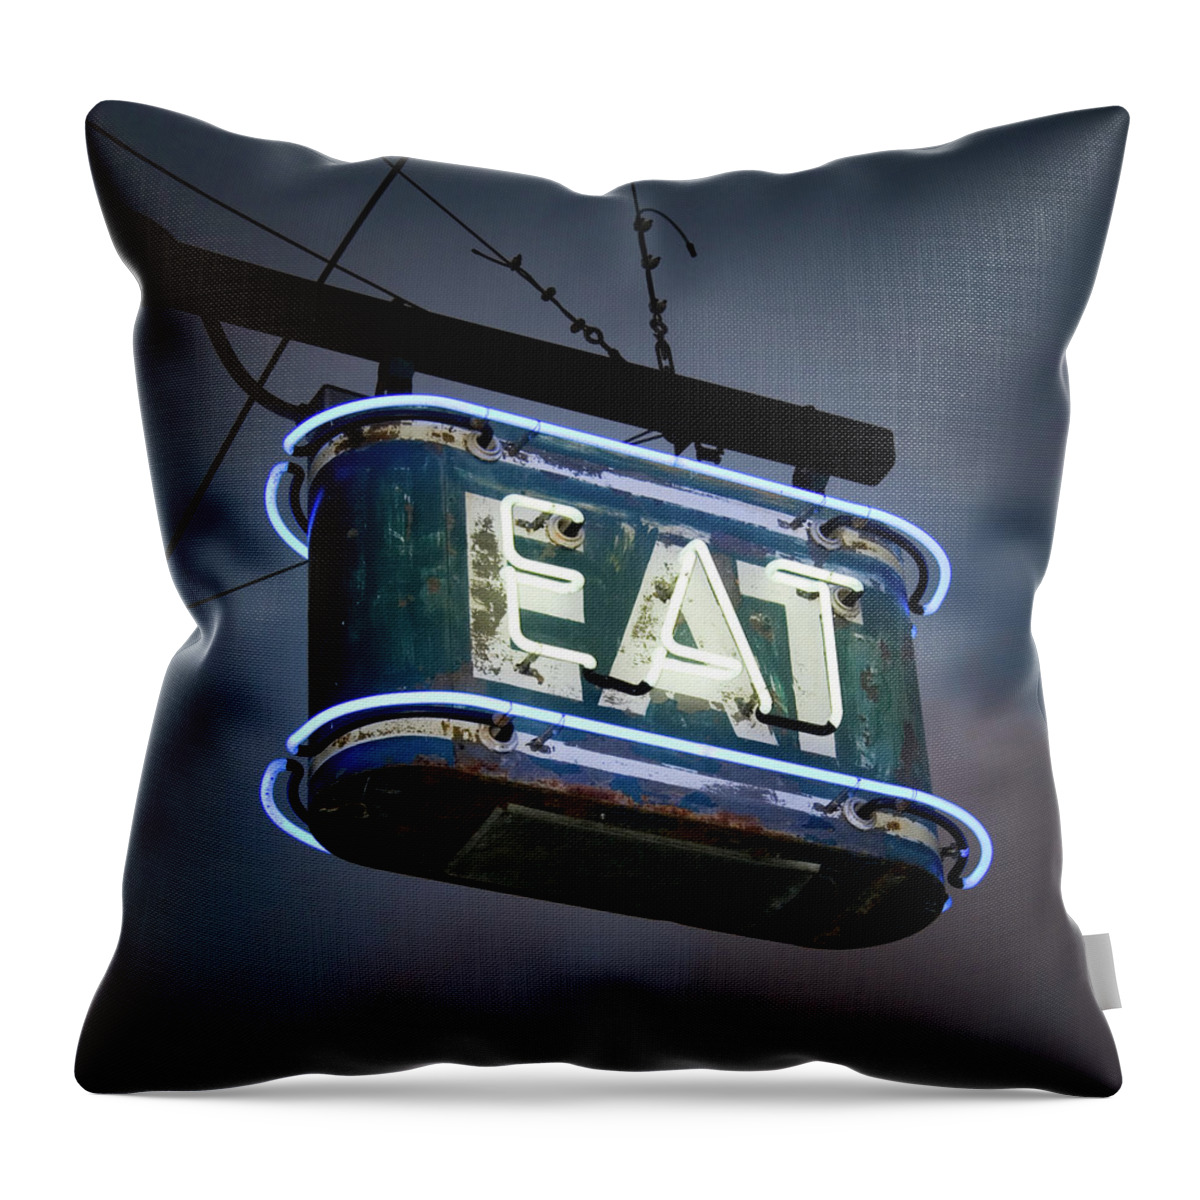 Hanging Throw Pillow featuring the photograph Neon Eat Sign by Kjohansen